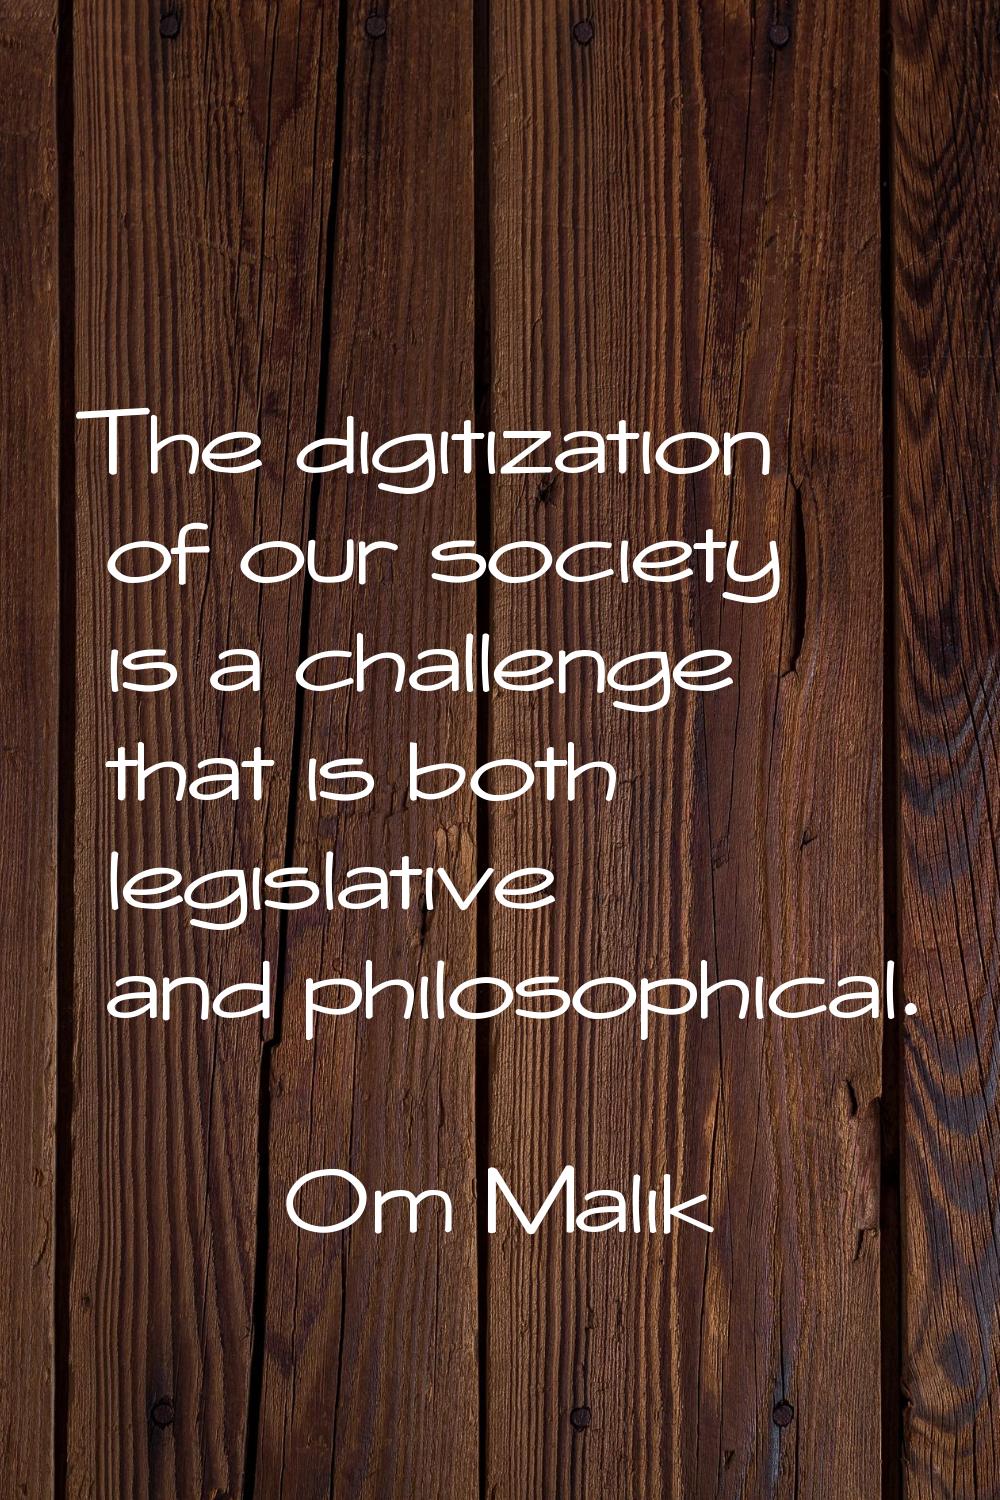 The digitization of our society is a challenge that is both legislative and philosophical.